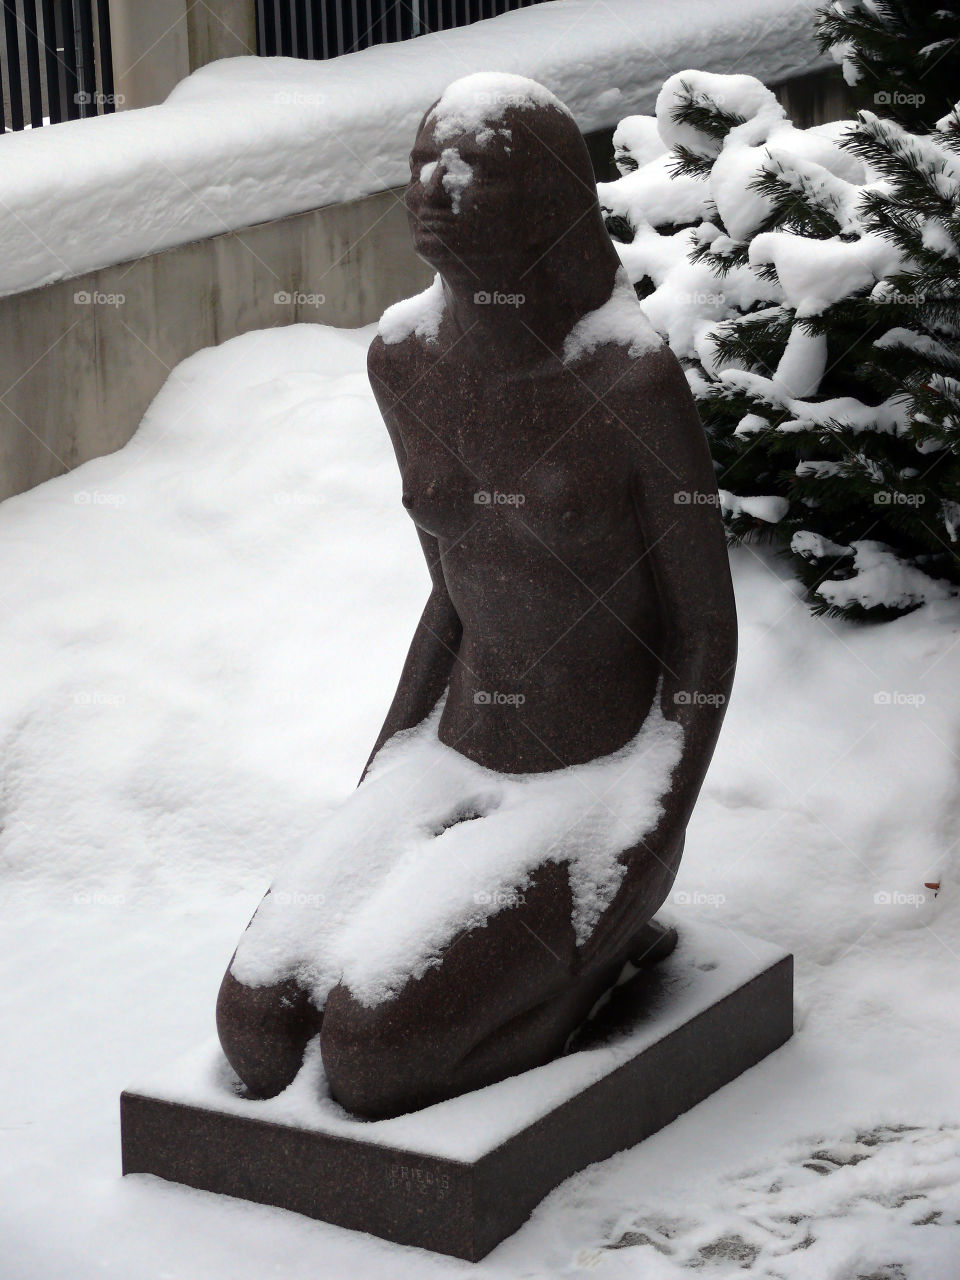 Snow covered sculpture during winter in Riga, Latvia.